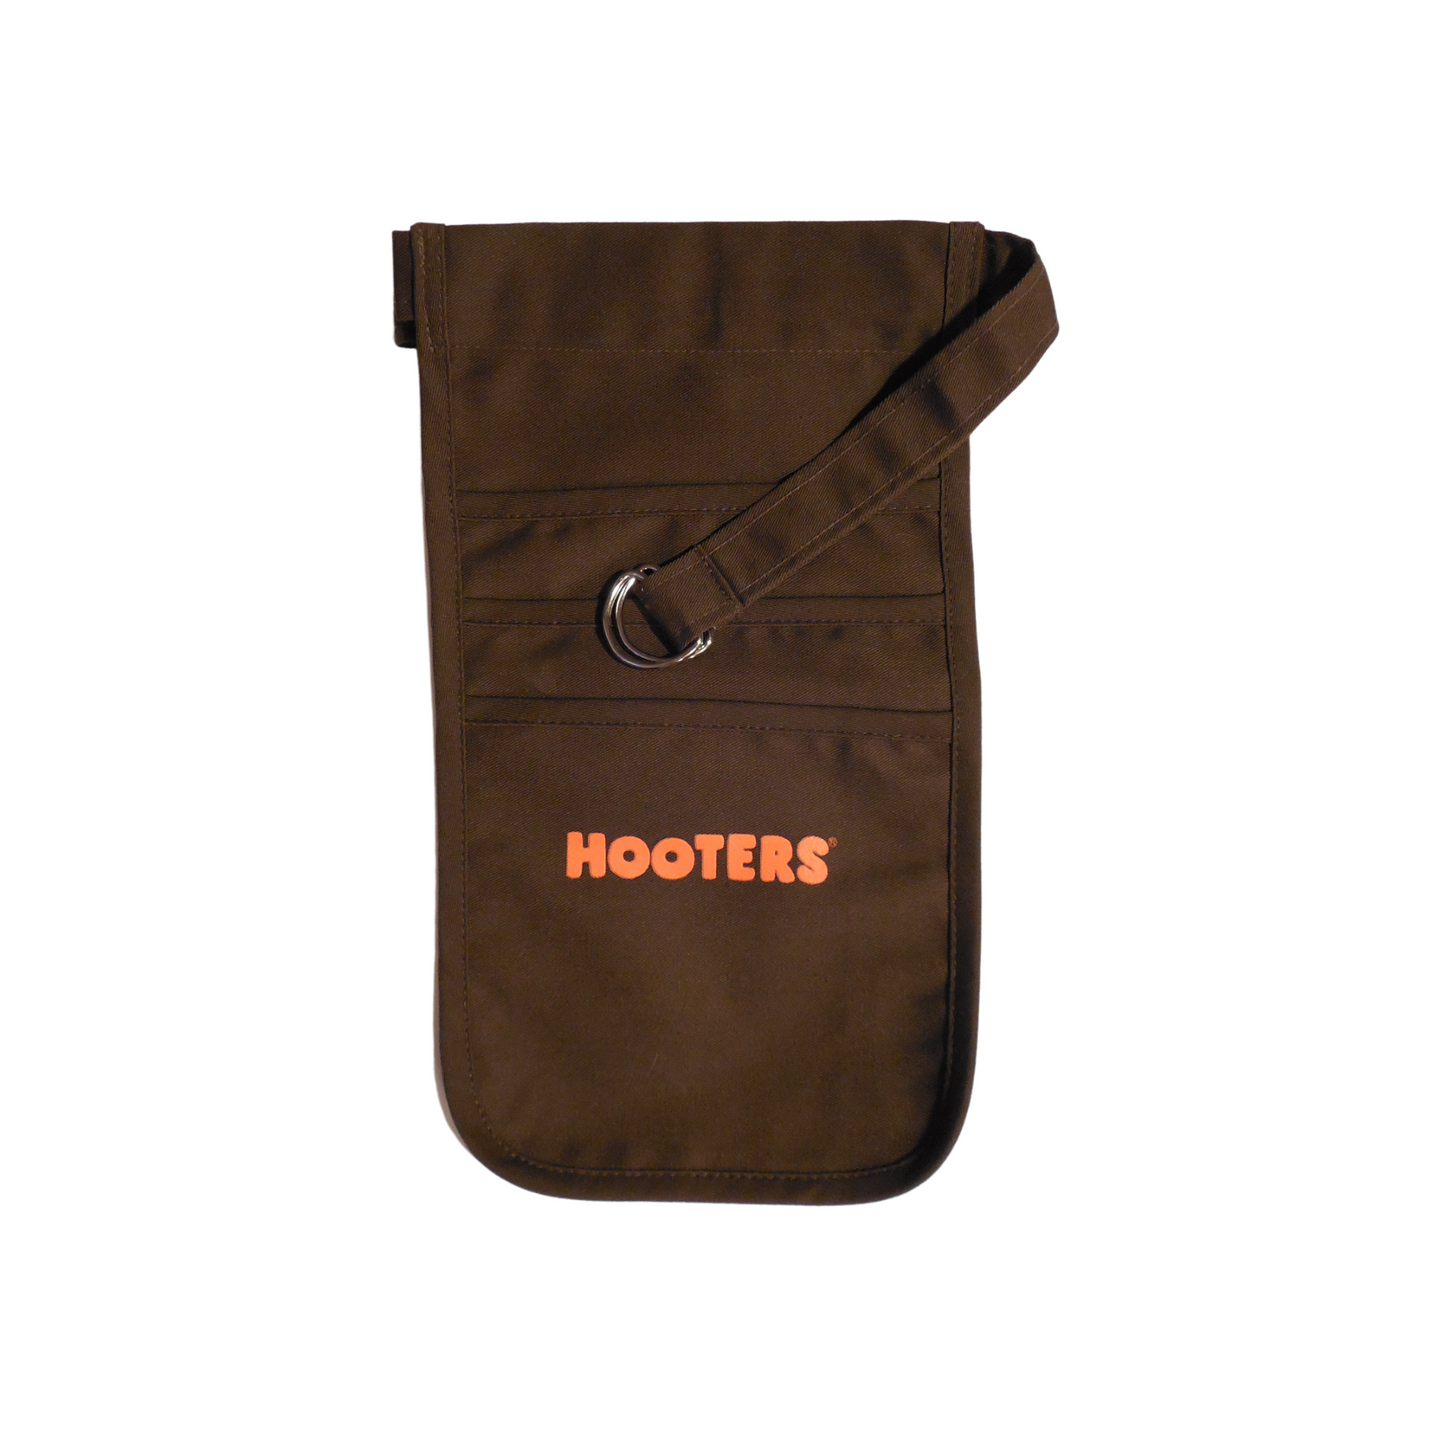 Hooters Uniform with Brown Pouch Pantyhose Medium Socks